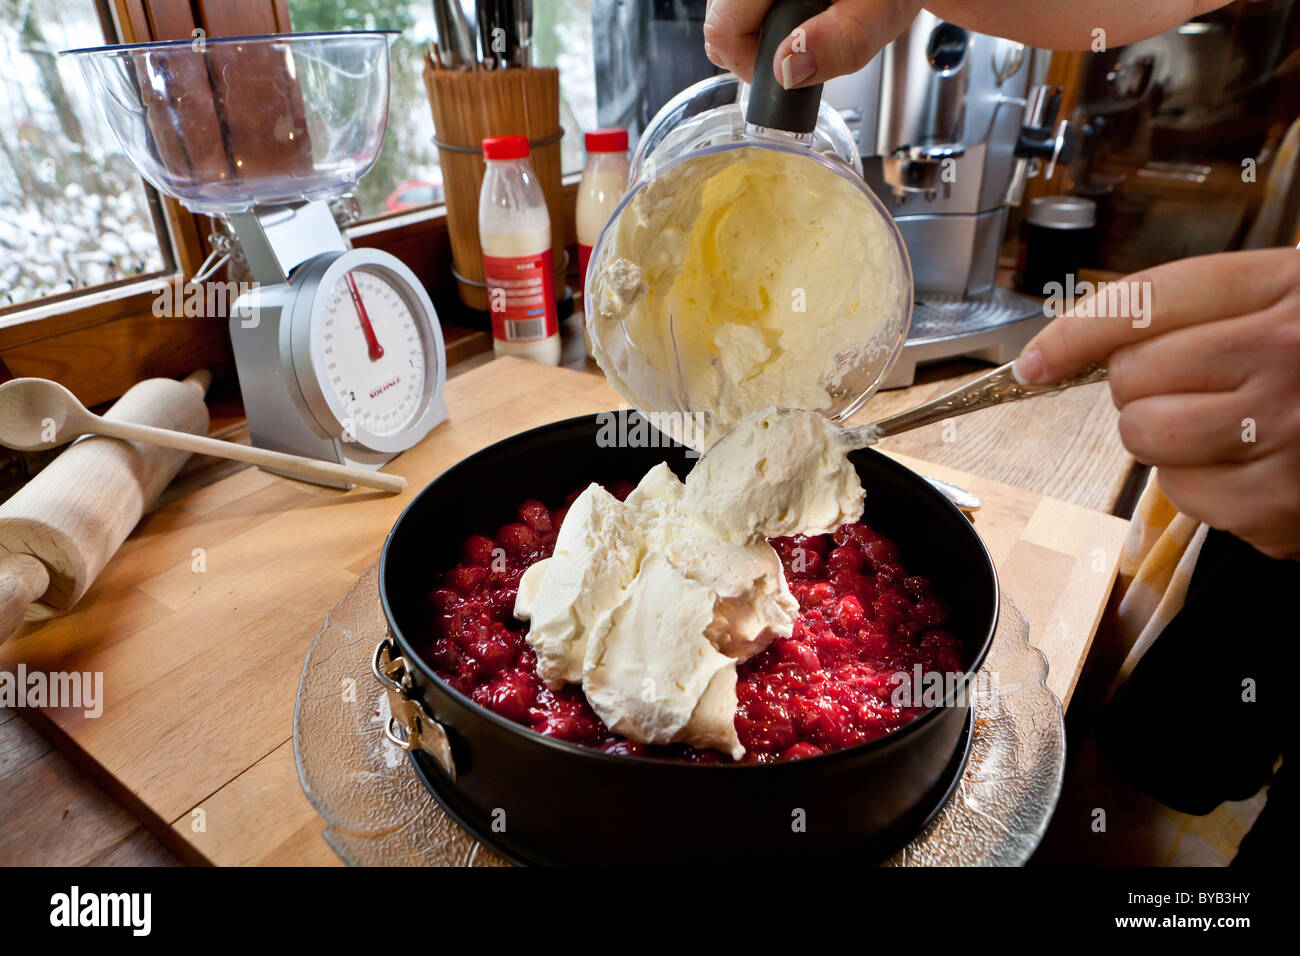 Preparation of a home-made Black Forest gateau, putting cream onto the ... image image